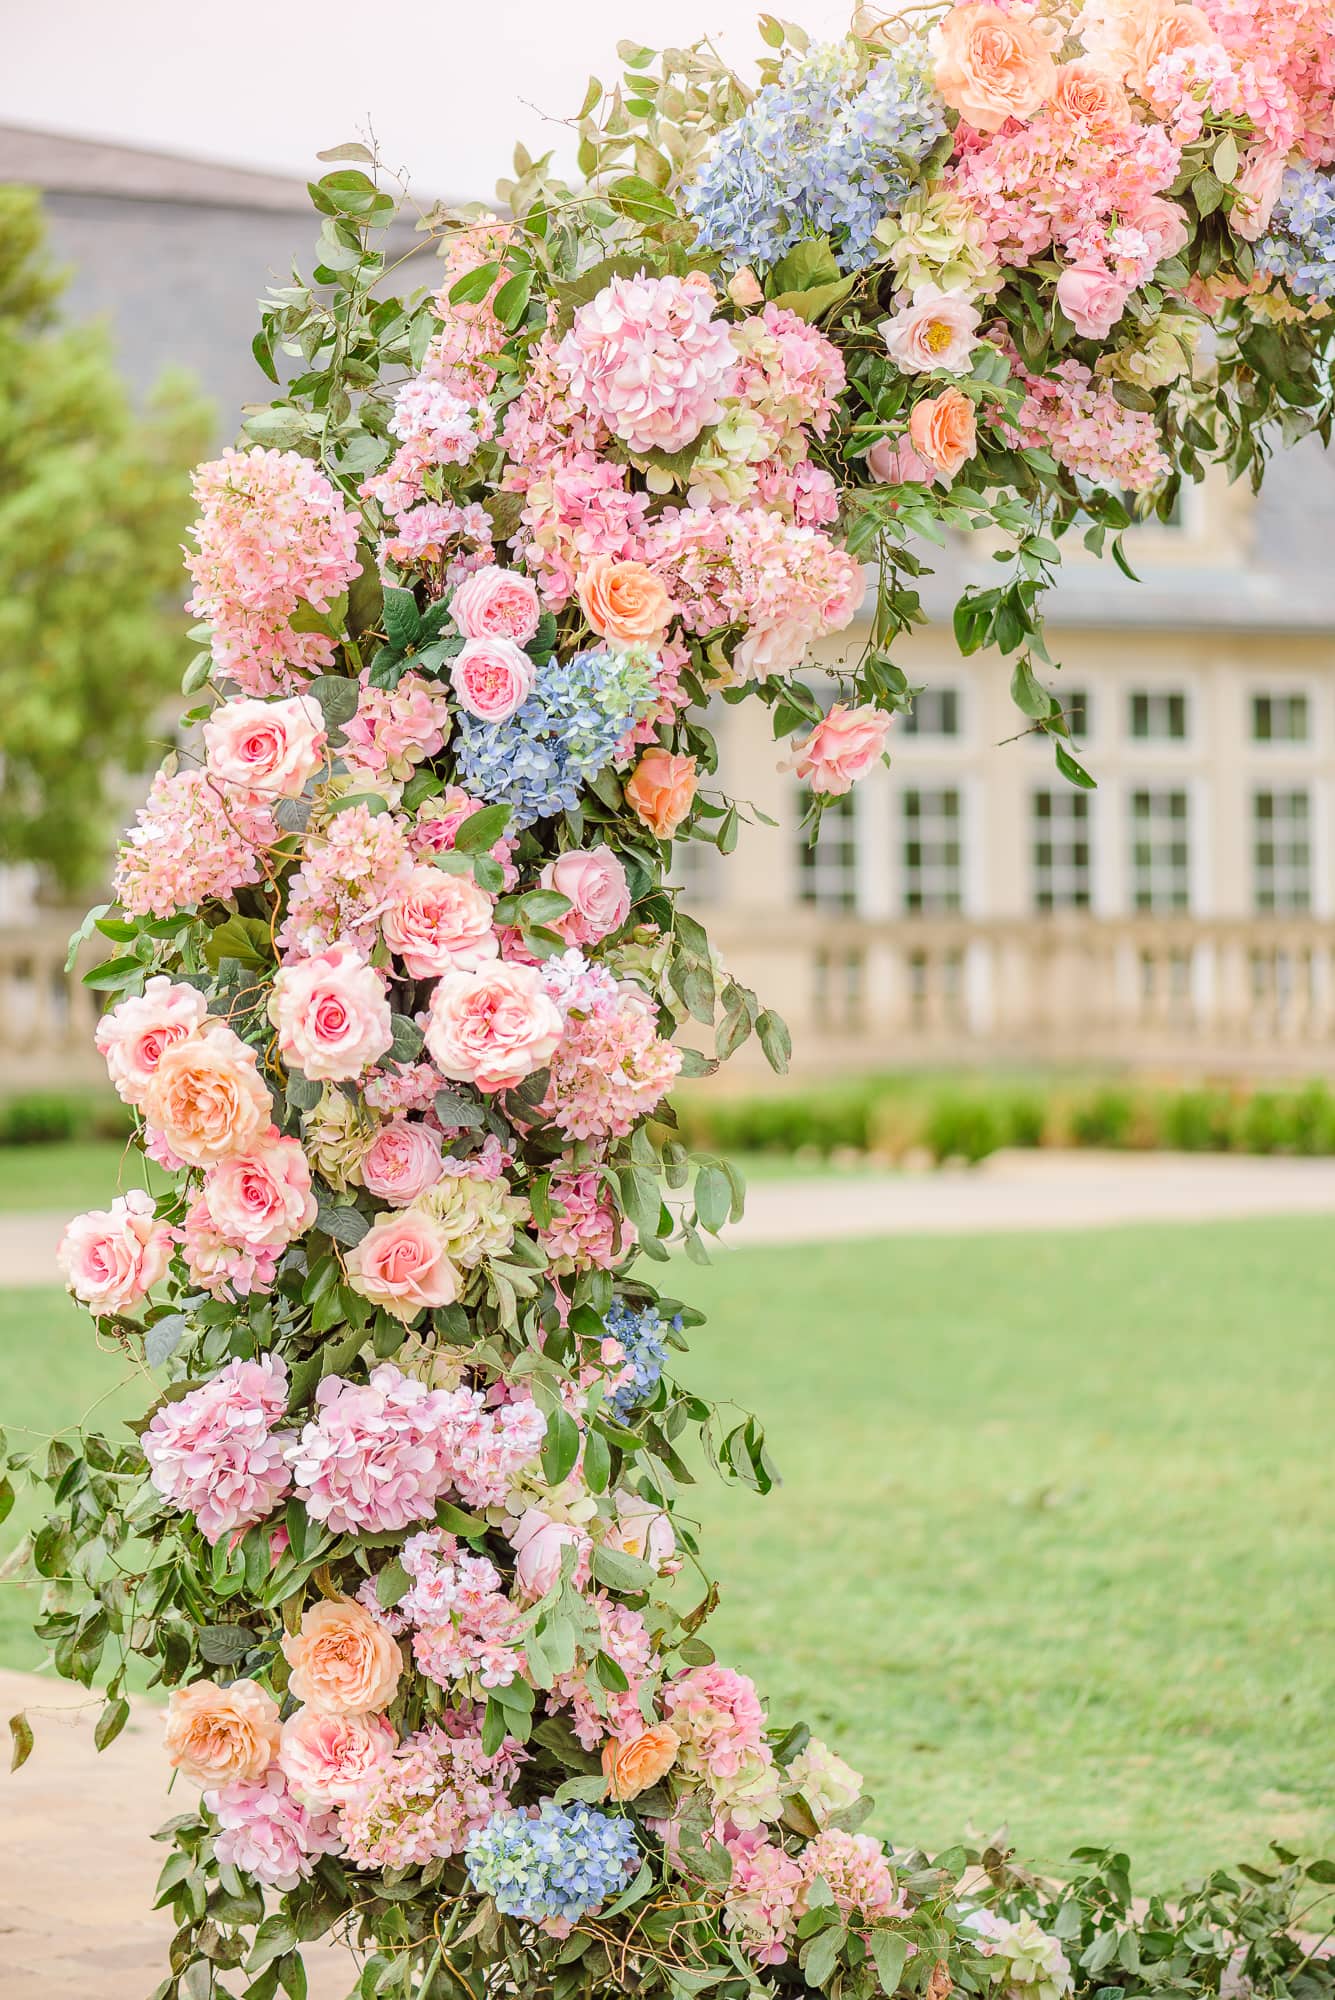 A closeup photo of this wedding backdrop with flowers in summer colors.